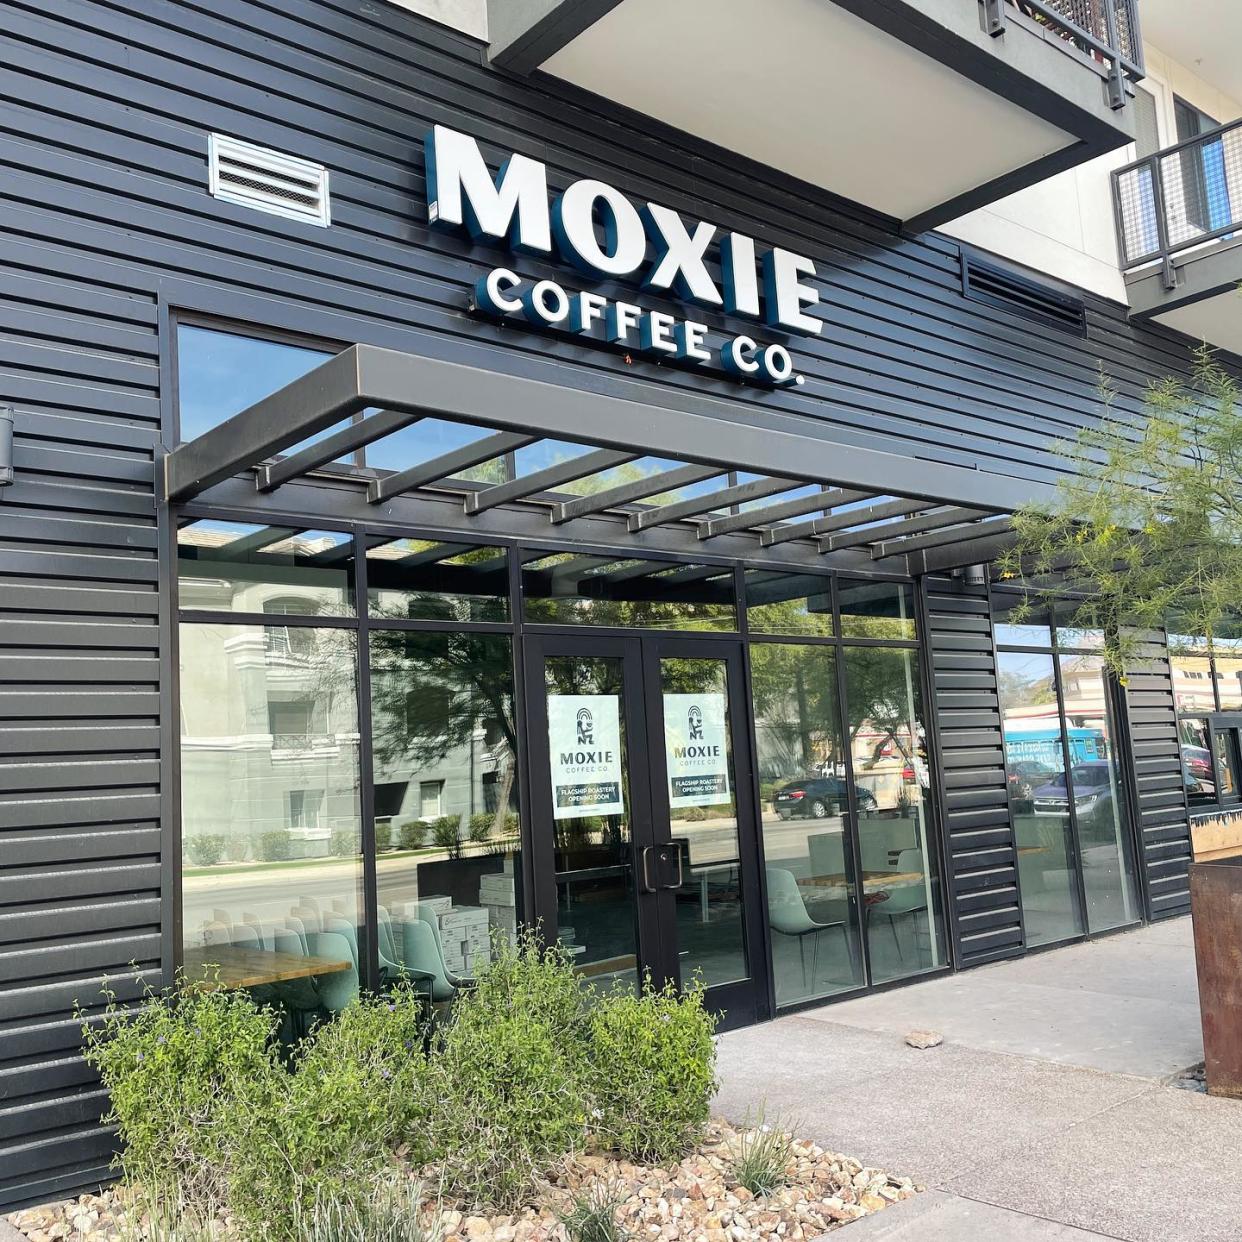 Moxie Coffee Co. opened on May 8, 2021, on the bottom floor of The Art apartments on 16th Street in Phoenix.